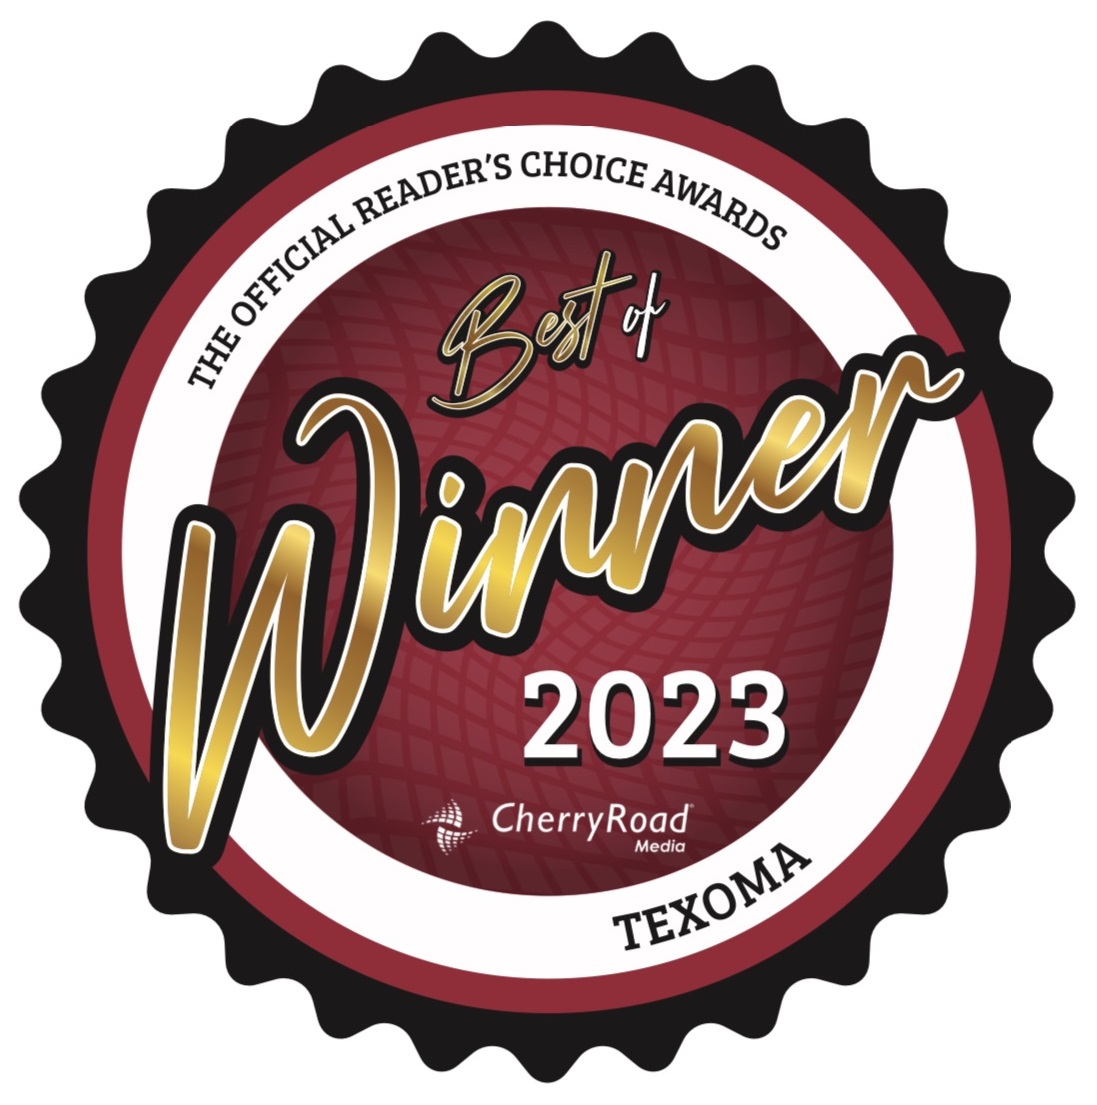 Voted Best of Texoma 2023